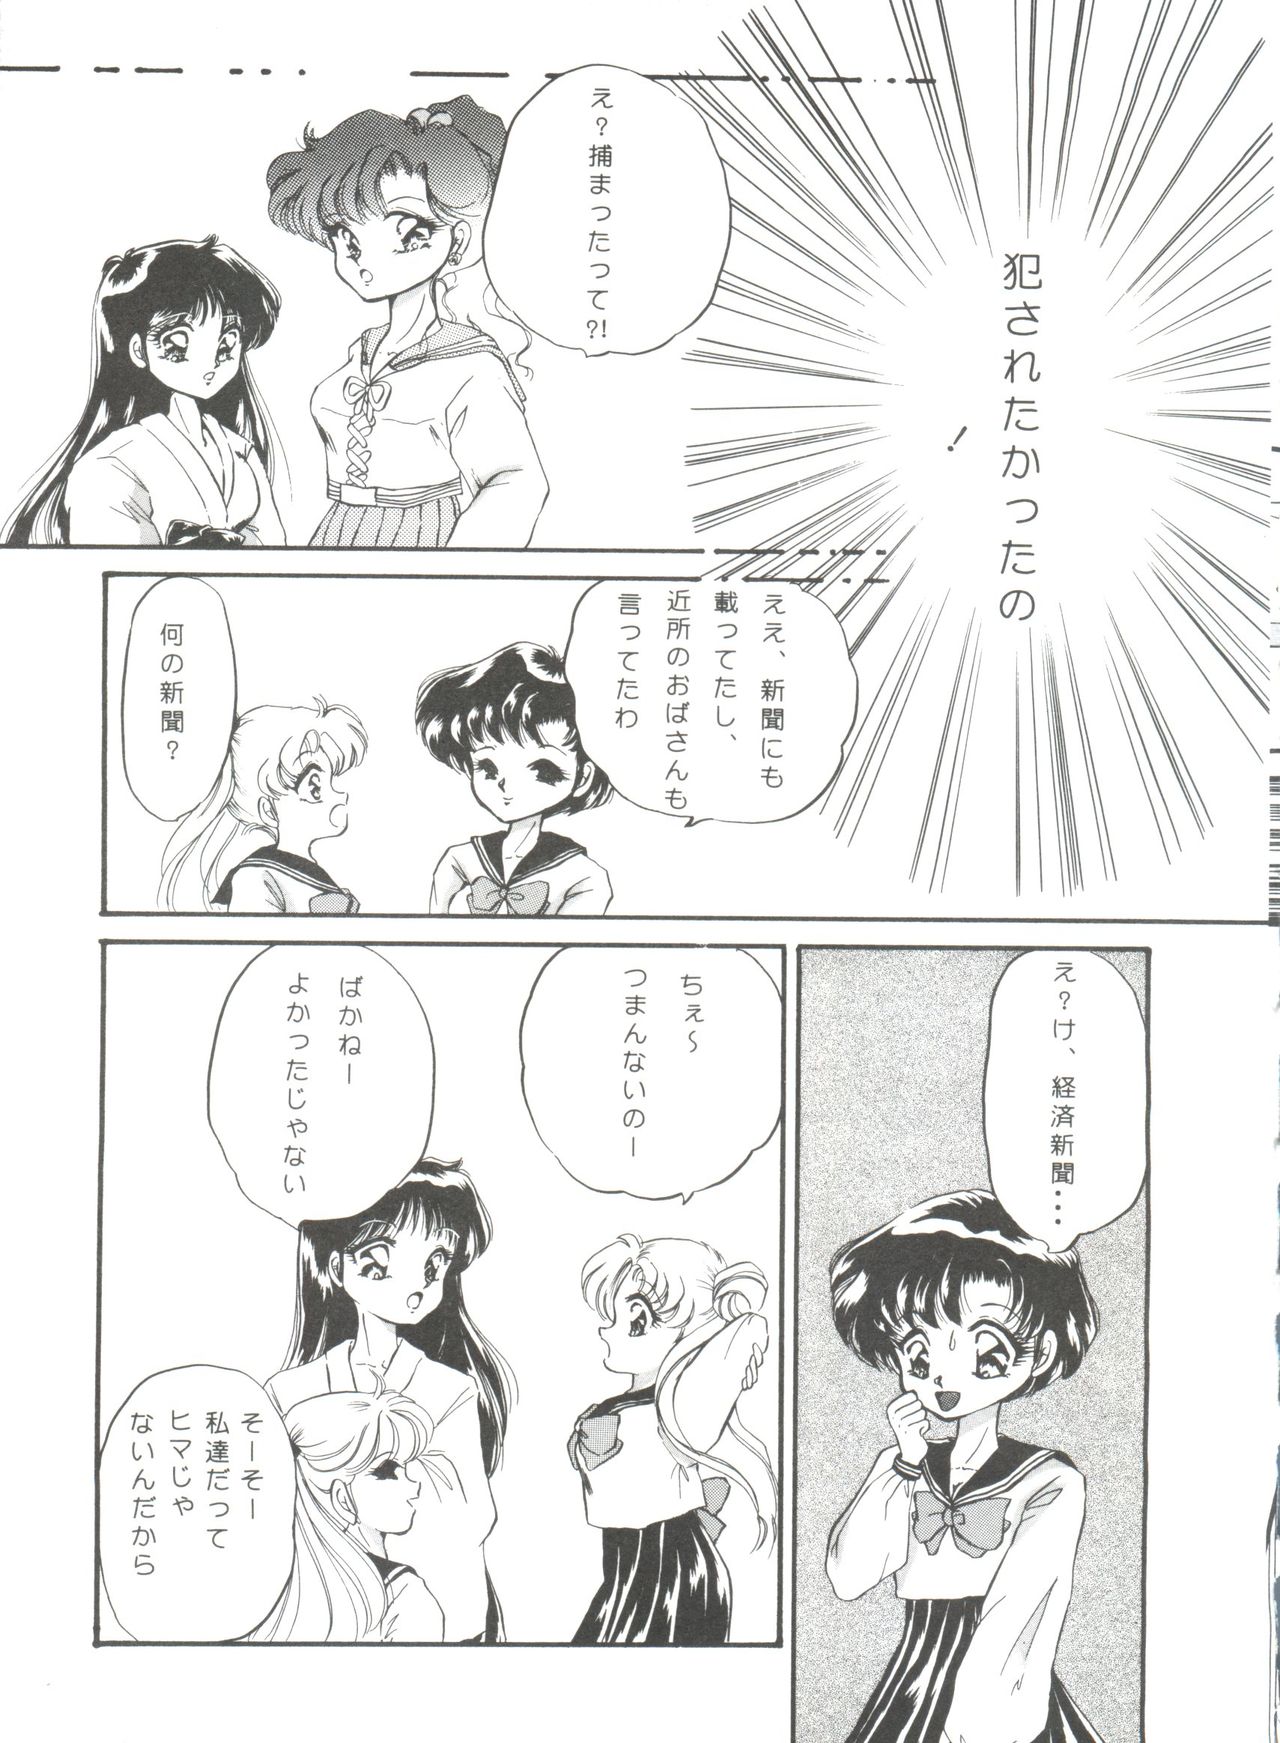 [Anthology] From the Moon (Bishoujo Senshi Sailor Moon) page 47 full